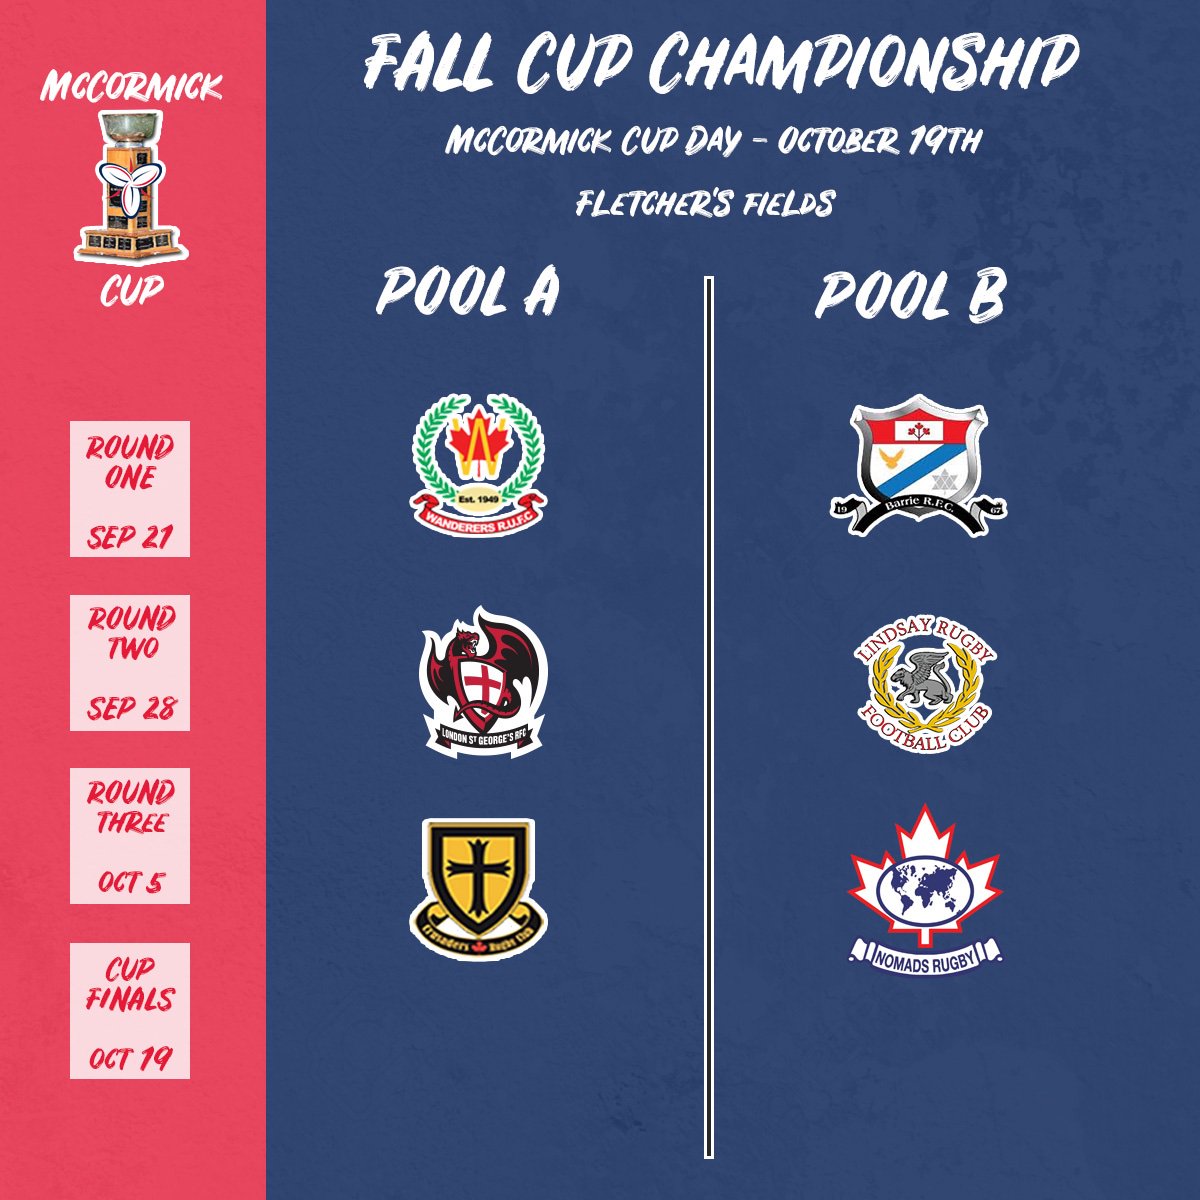 The McCormick Cup Championship and the Fall Cup Championship both begin this weekend! Click the link below for a full preview of both competitions! FALL CUP PREVIEW: rugbyontario.com/news-detail/10… MCCORMICK CUP PREVIEW: rugbyontario.com/news-detail/10…